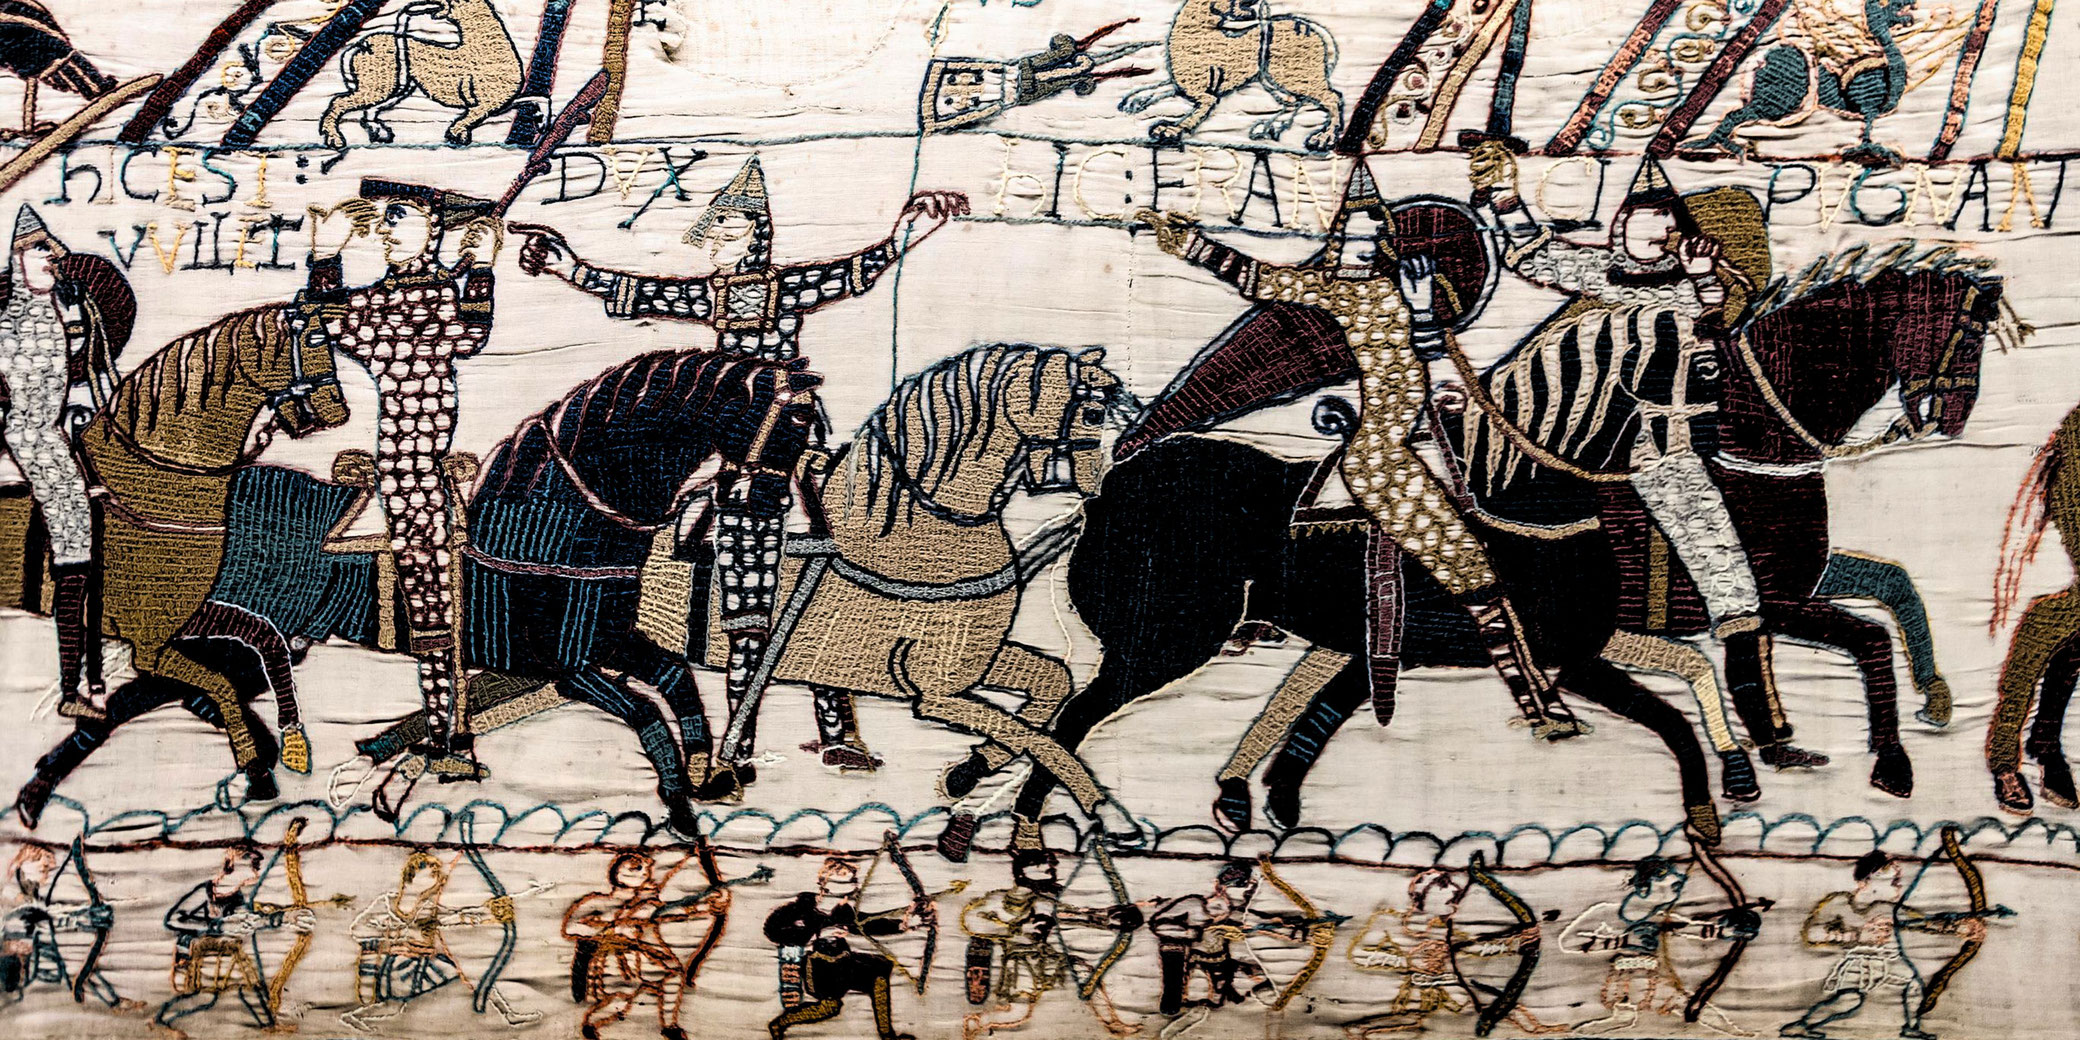 Why is the Bayeux Tapestry so controversial?